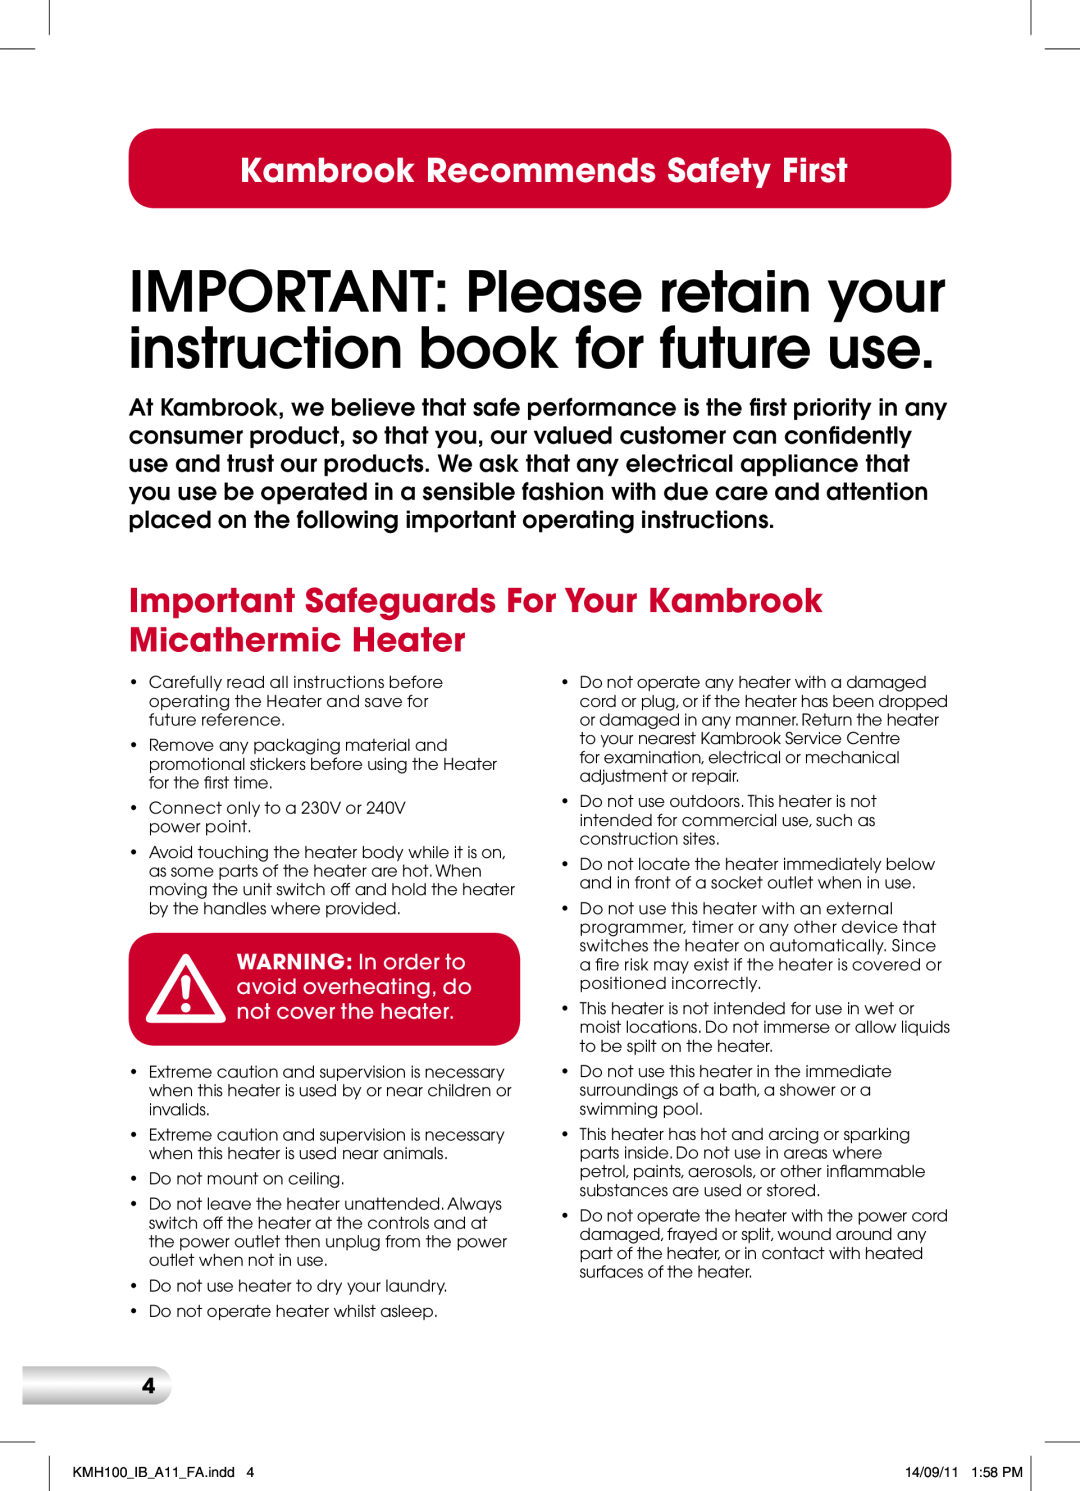 Kambrook KMH100 manual Kambrook Recommends Safety First 